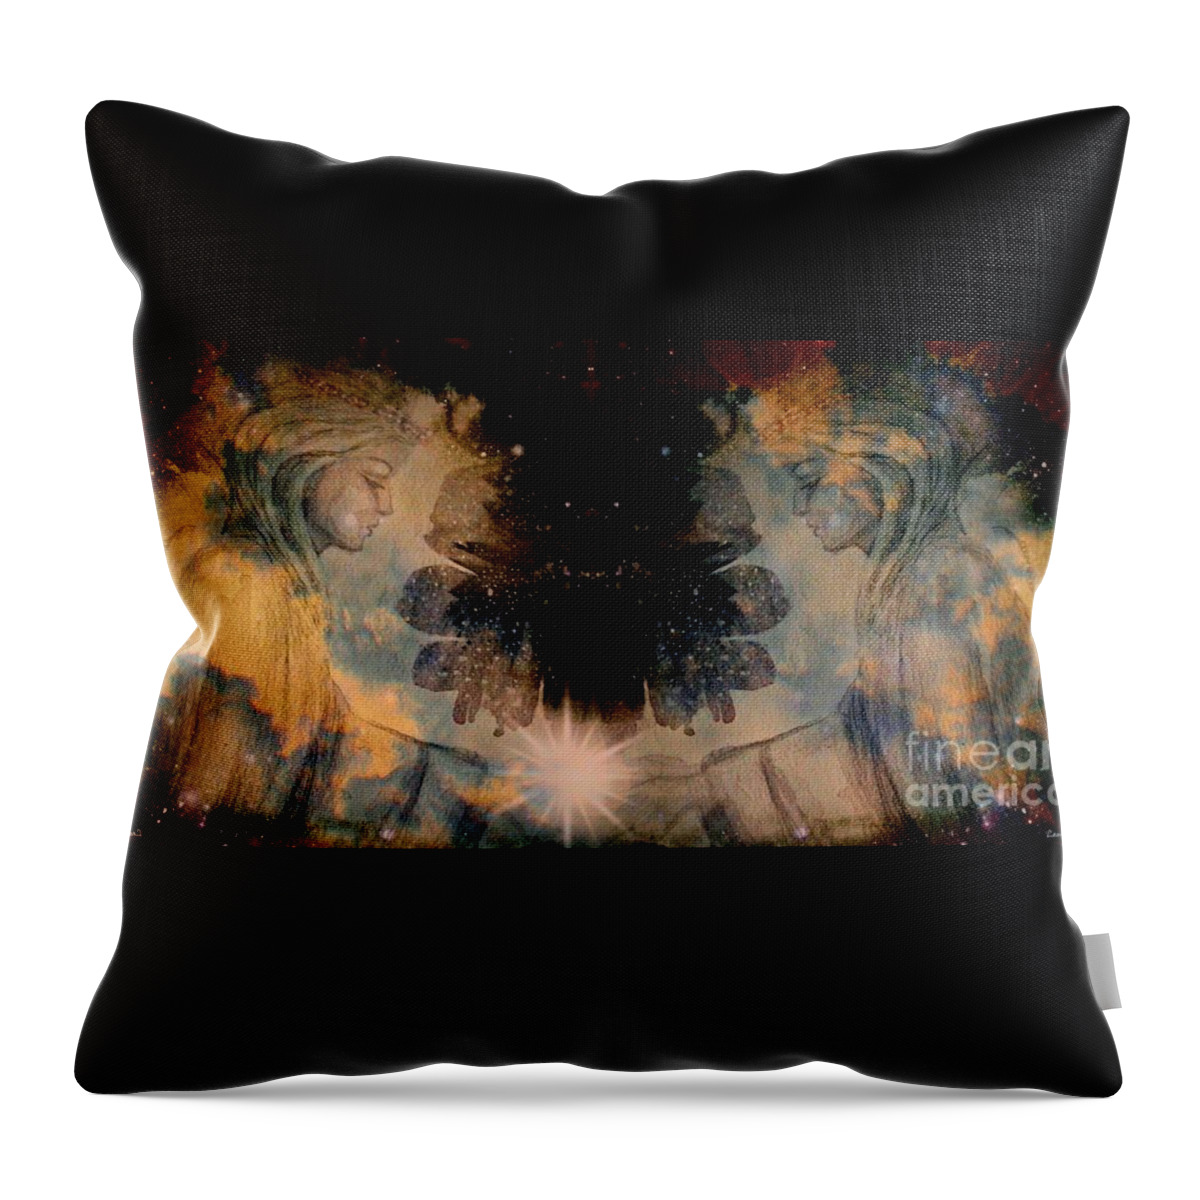 Angel Throw Pillow featuring the mixed media Angels Administering Spiritual Gifts by Leanne Seymour